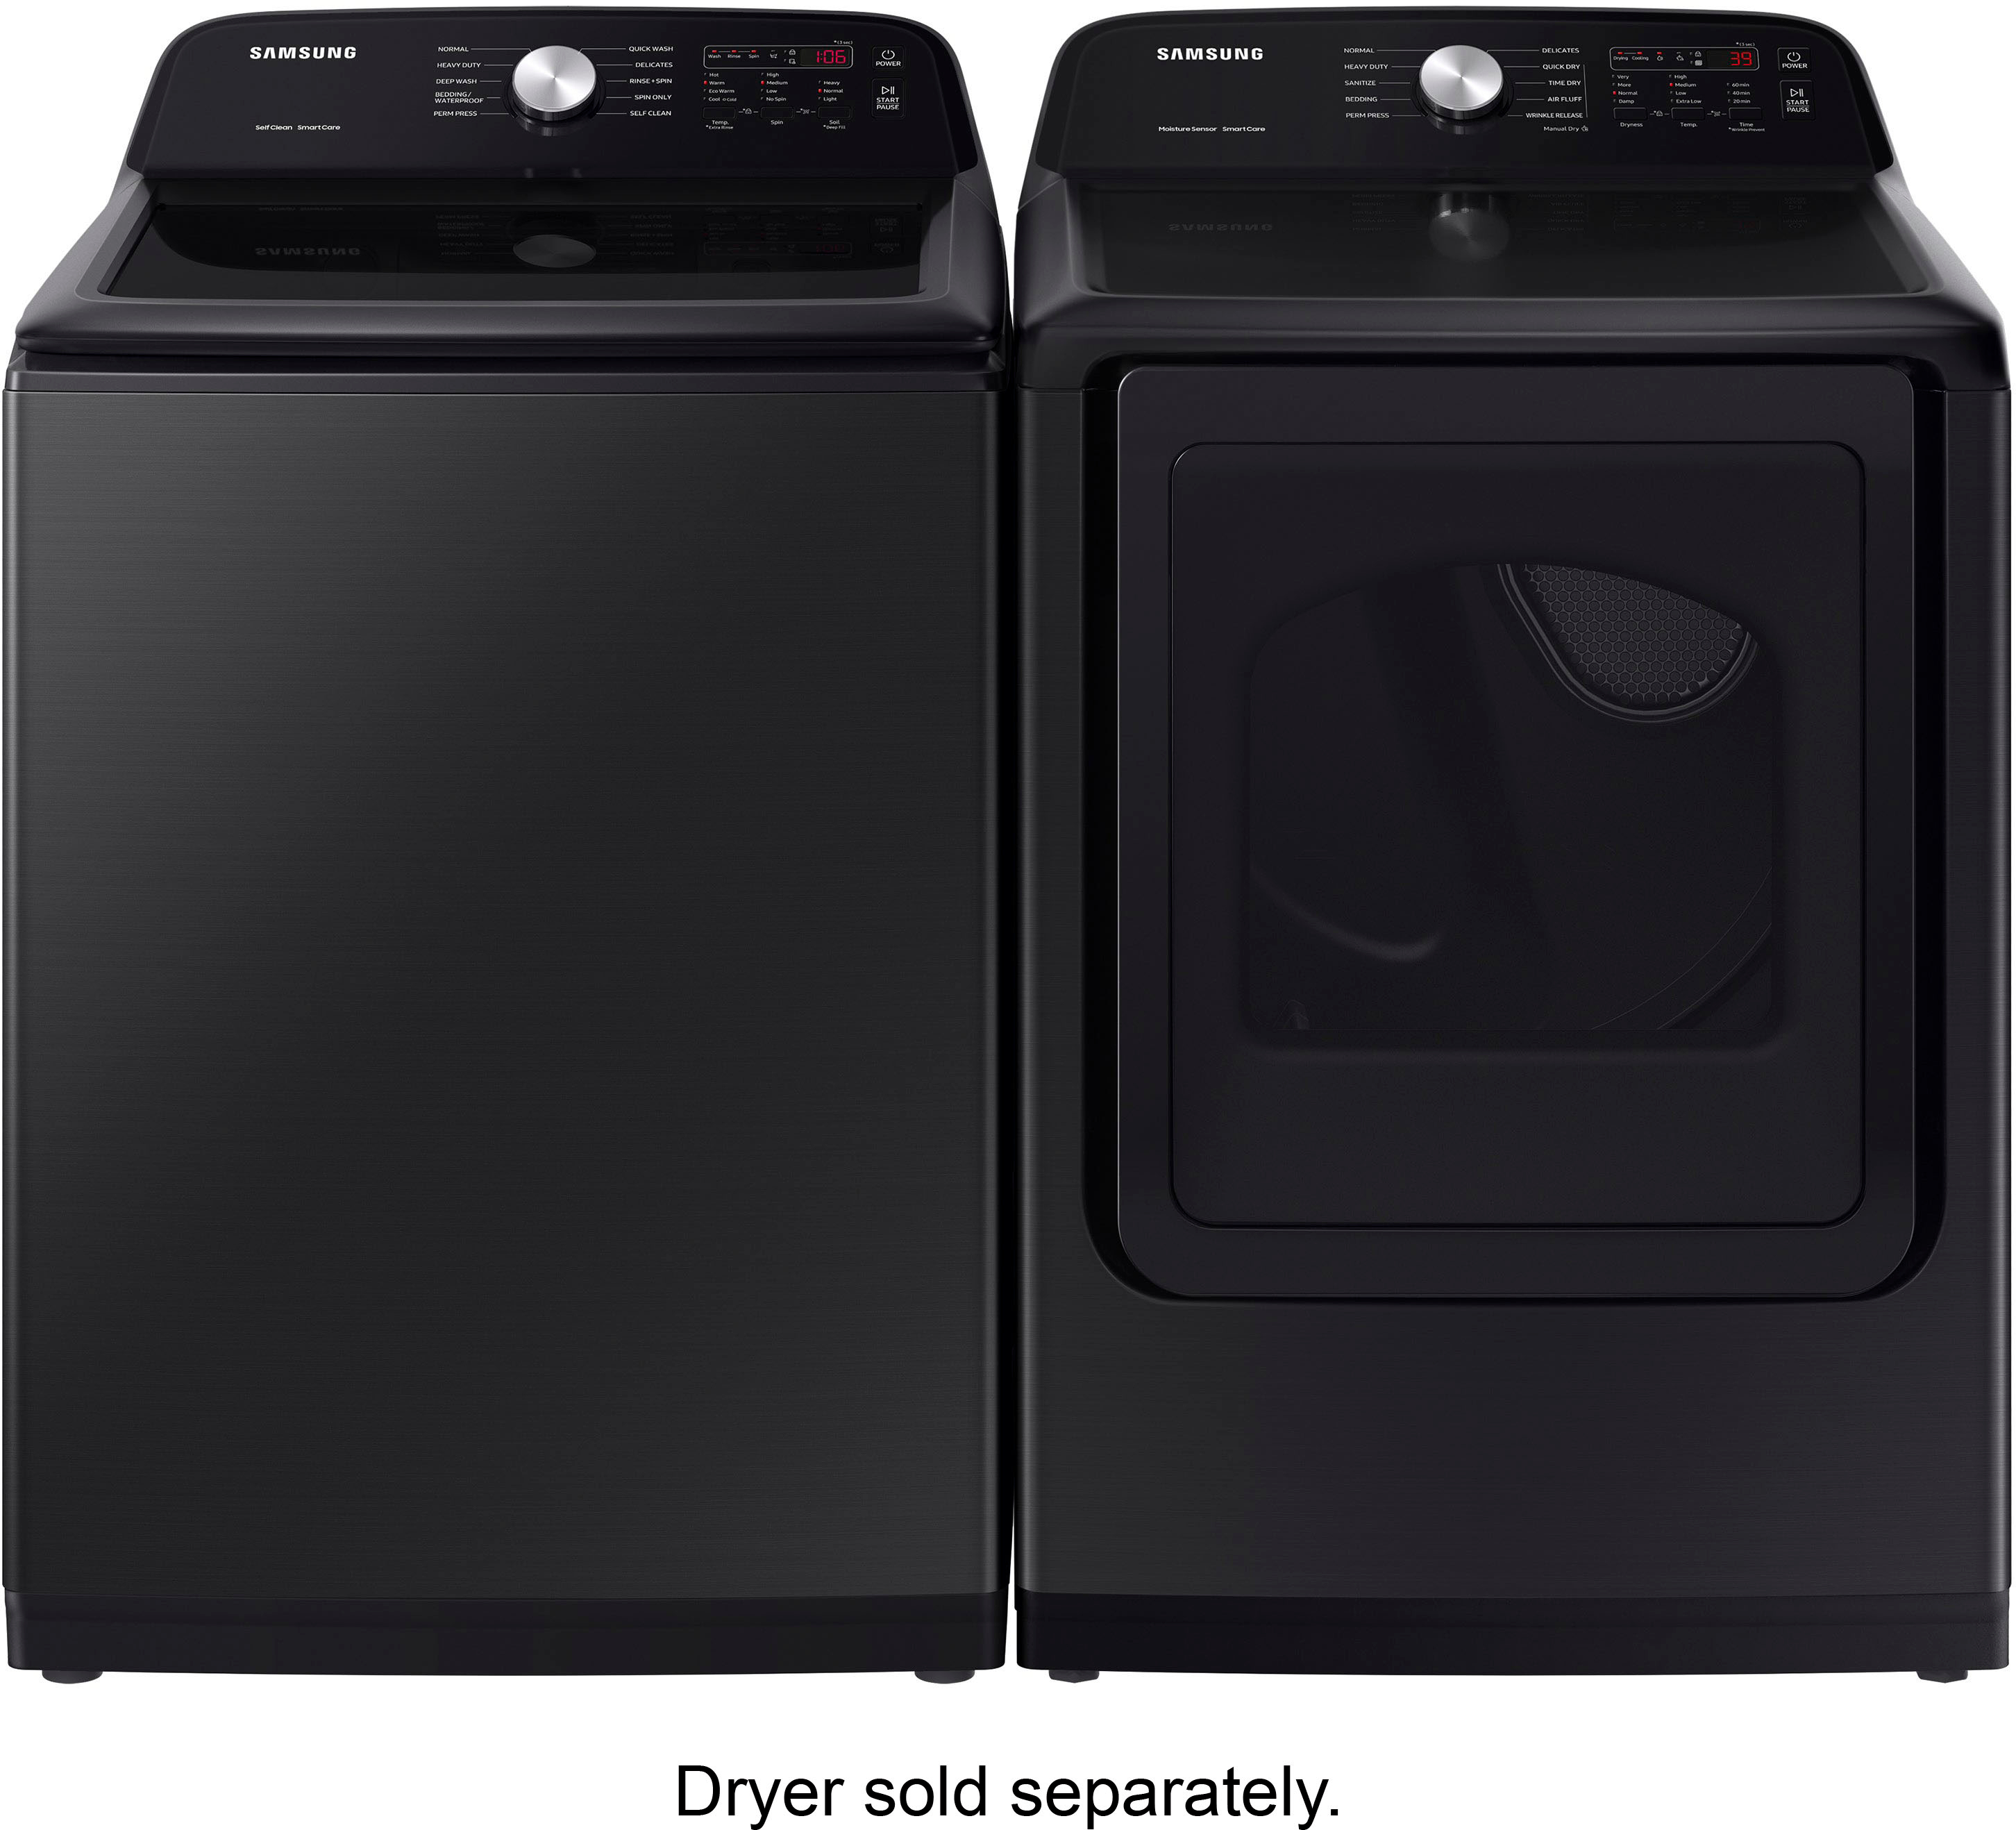 Samsung 4.9 cu. ft. Large Capacity Top Washer and Deep Fill Brushed Black WA49B5105AV/US - Best Buy